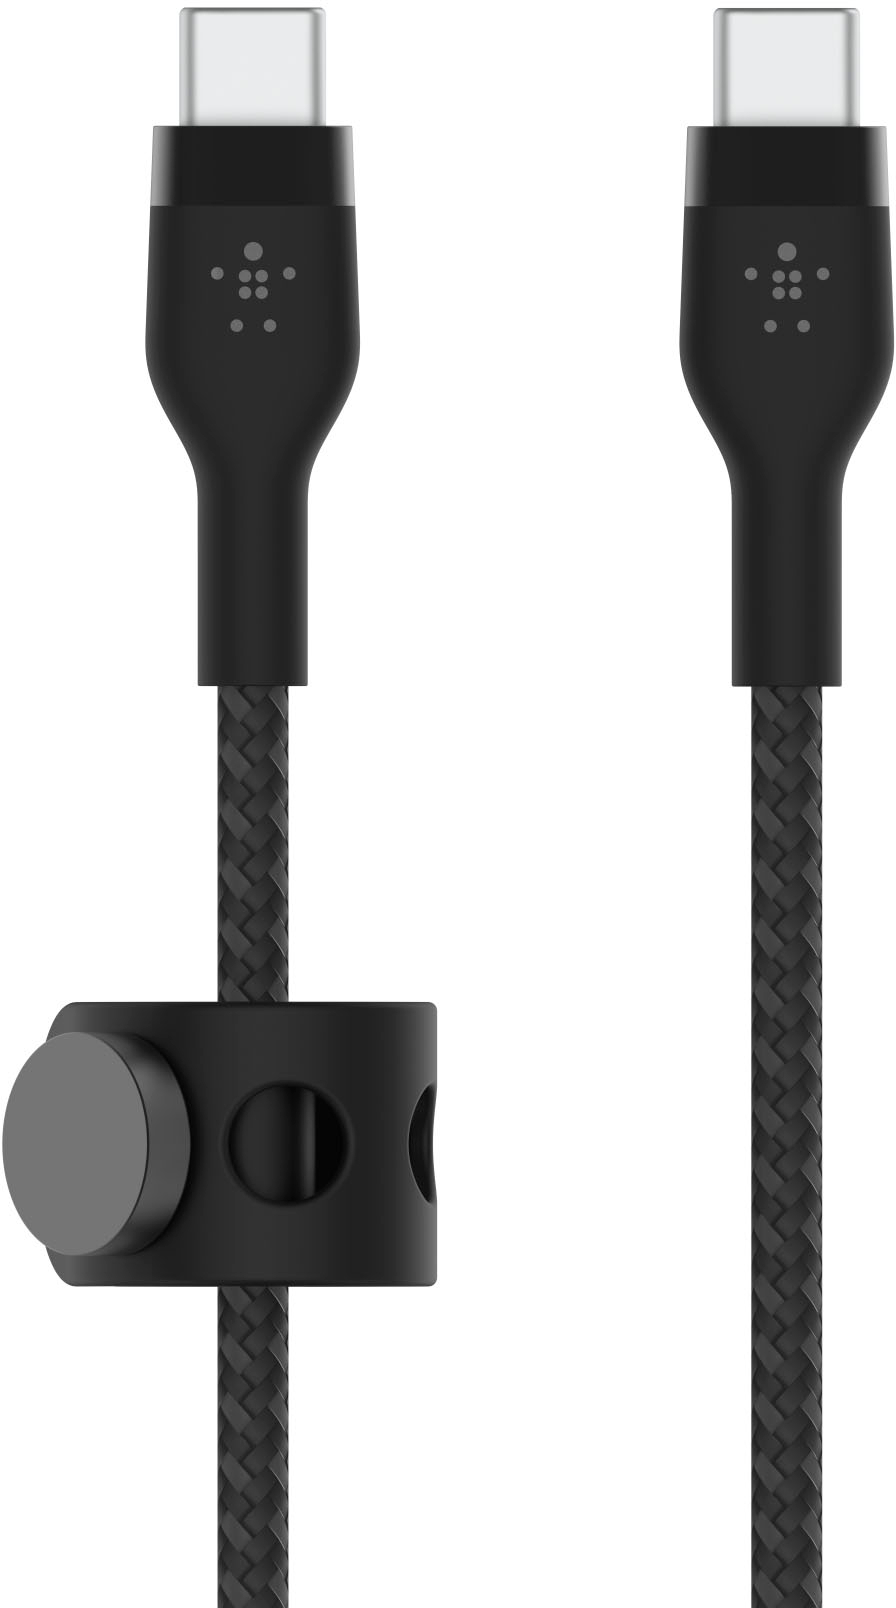 10ft (3m) USB 2.0 USB-C to USB-A Cable M/M - Black